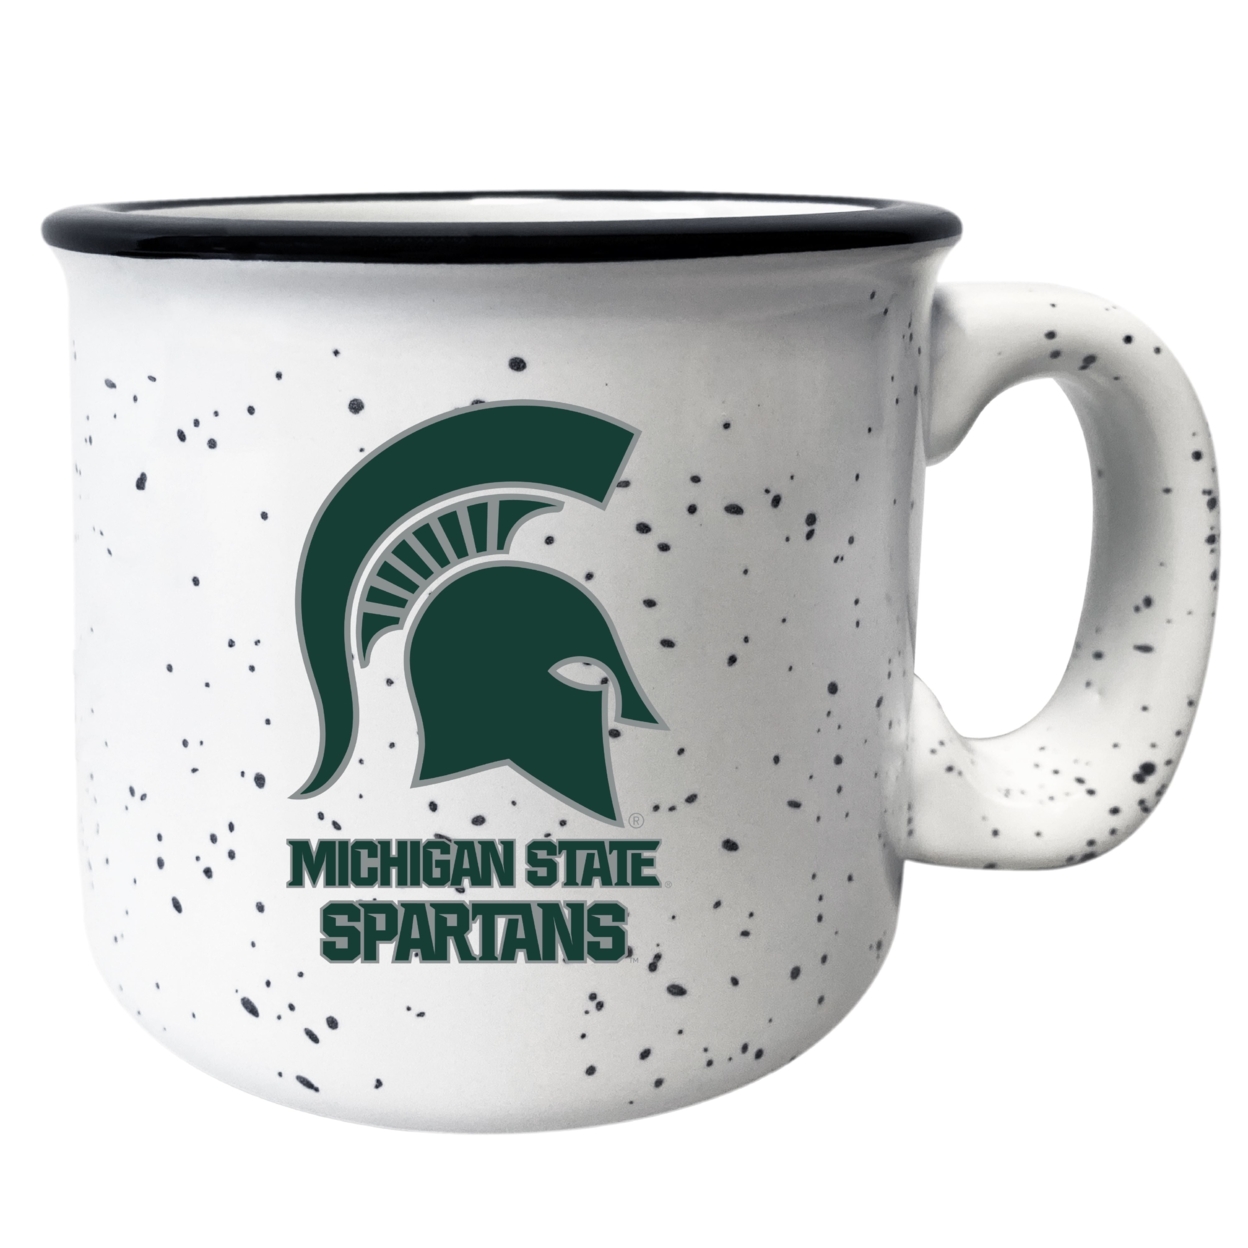 Michigan State Spartans Speckled Ceramic Camper Coffee Mug - Choose Your Color - Gray